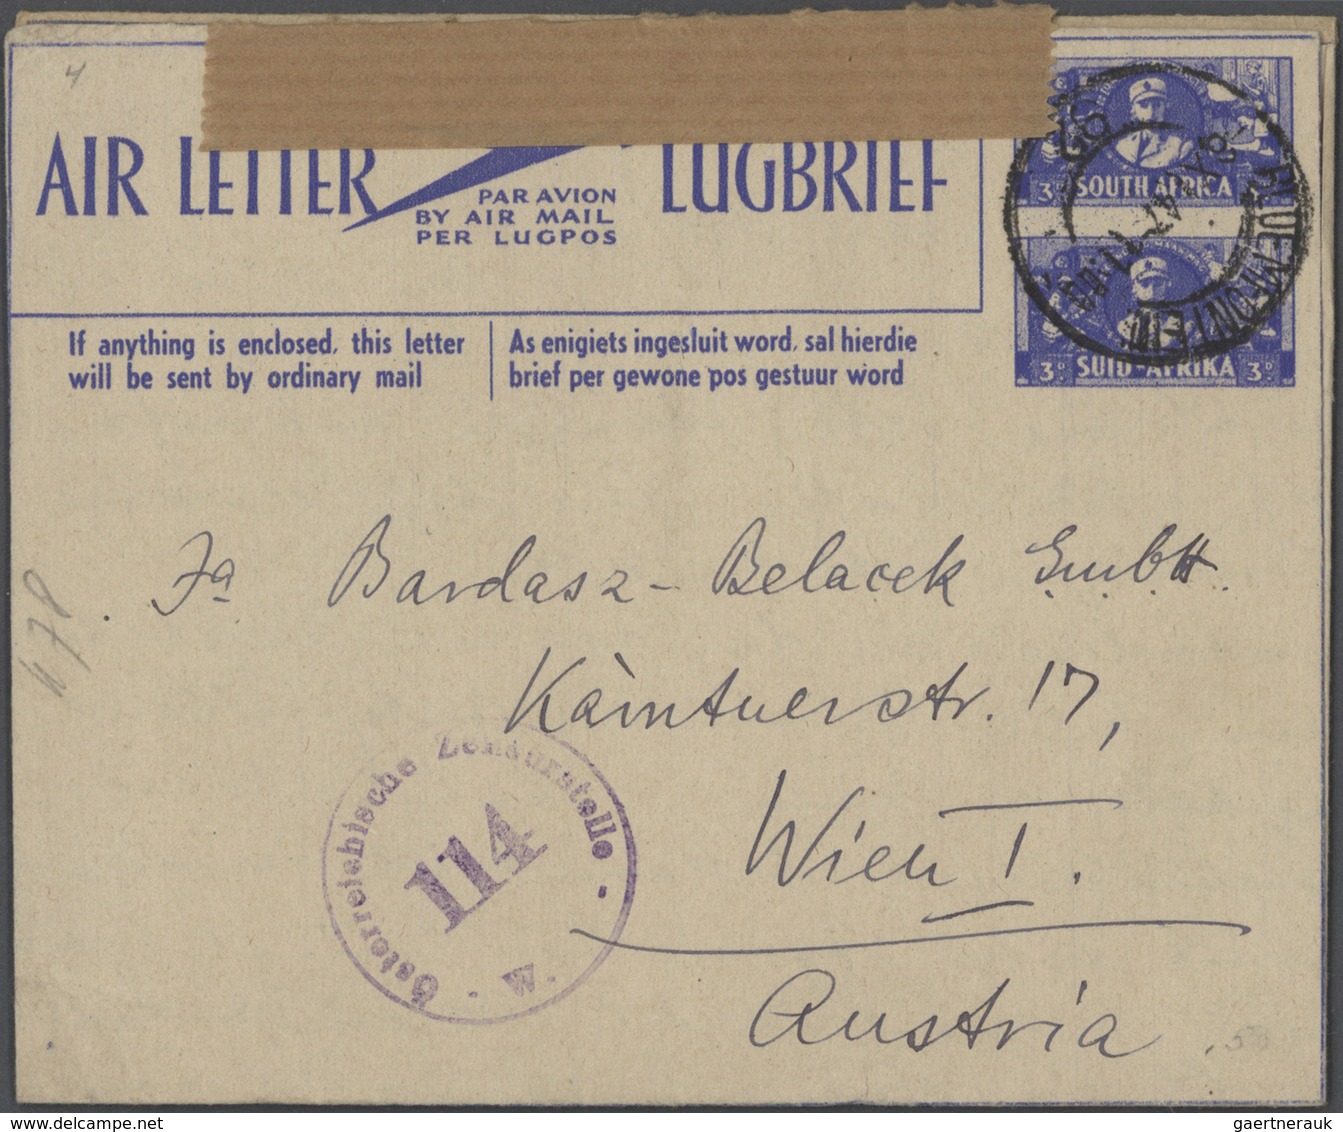 Südafrika: 1945/80 (ca.), AEROGRAMMES: duplicated accumulation of about 280 airletters, lettercards